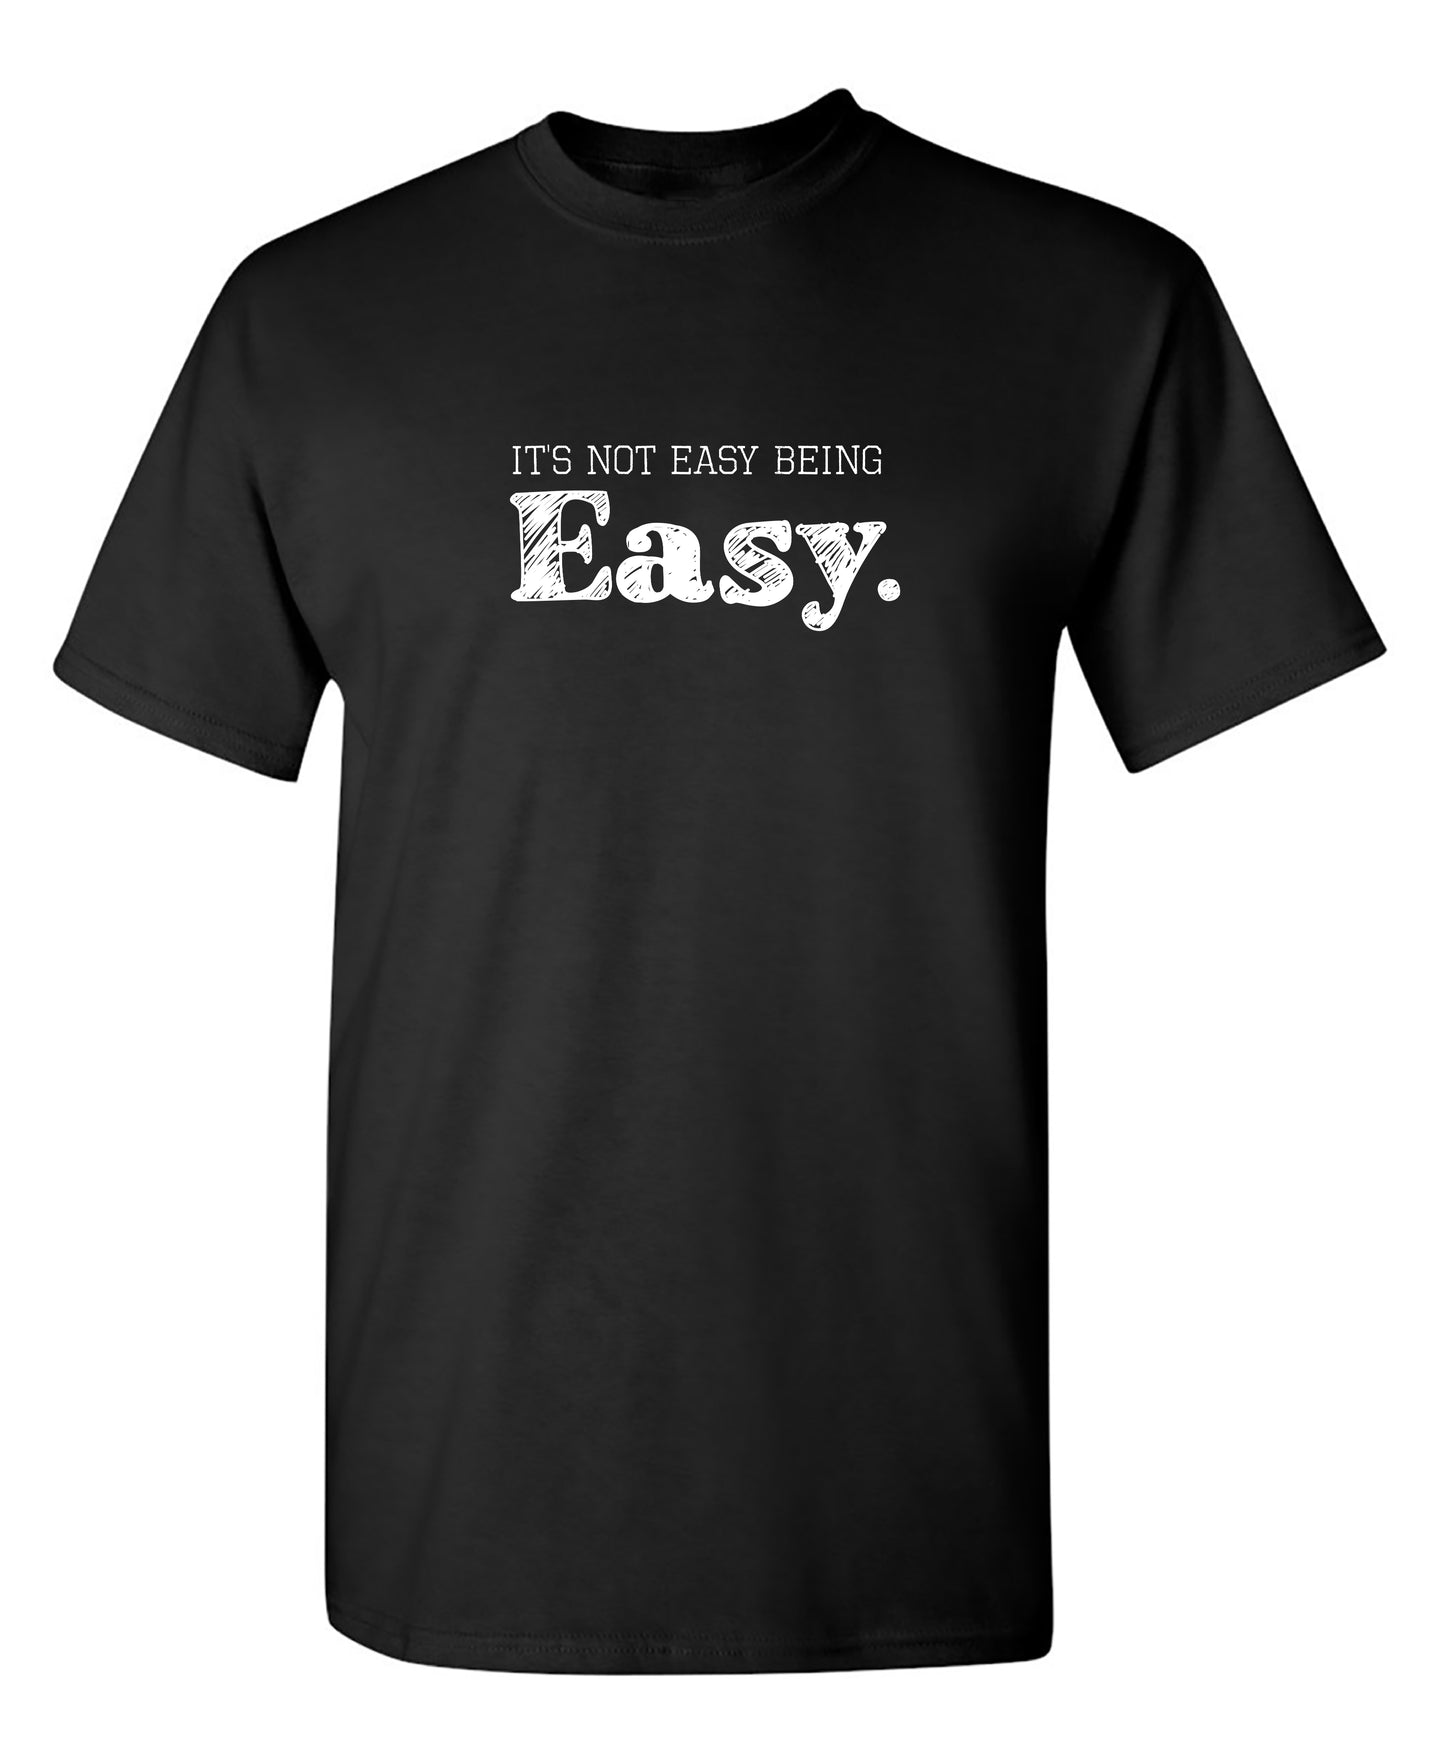 It's Not Easy Being Easy. - Funny T Shirts & Graphic Tees